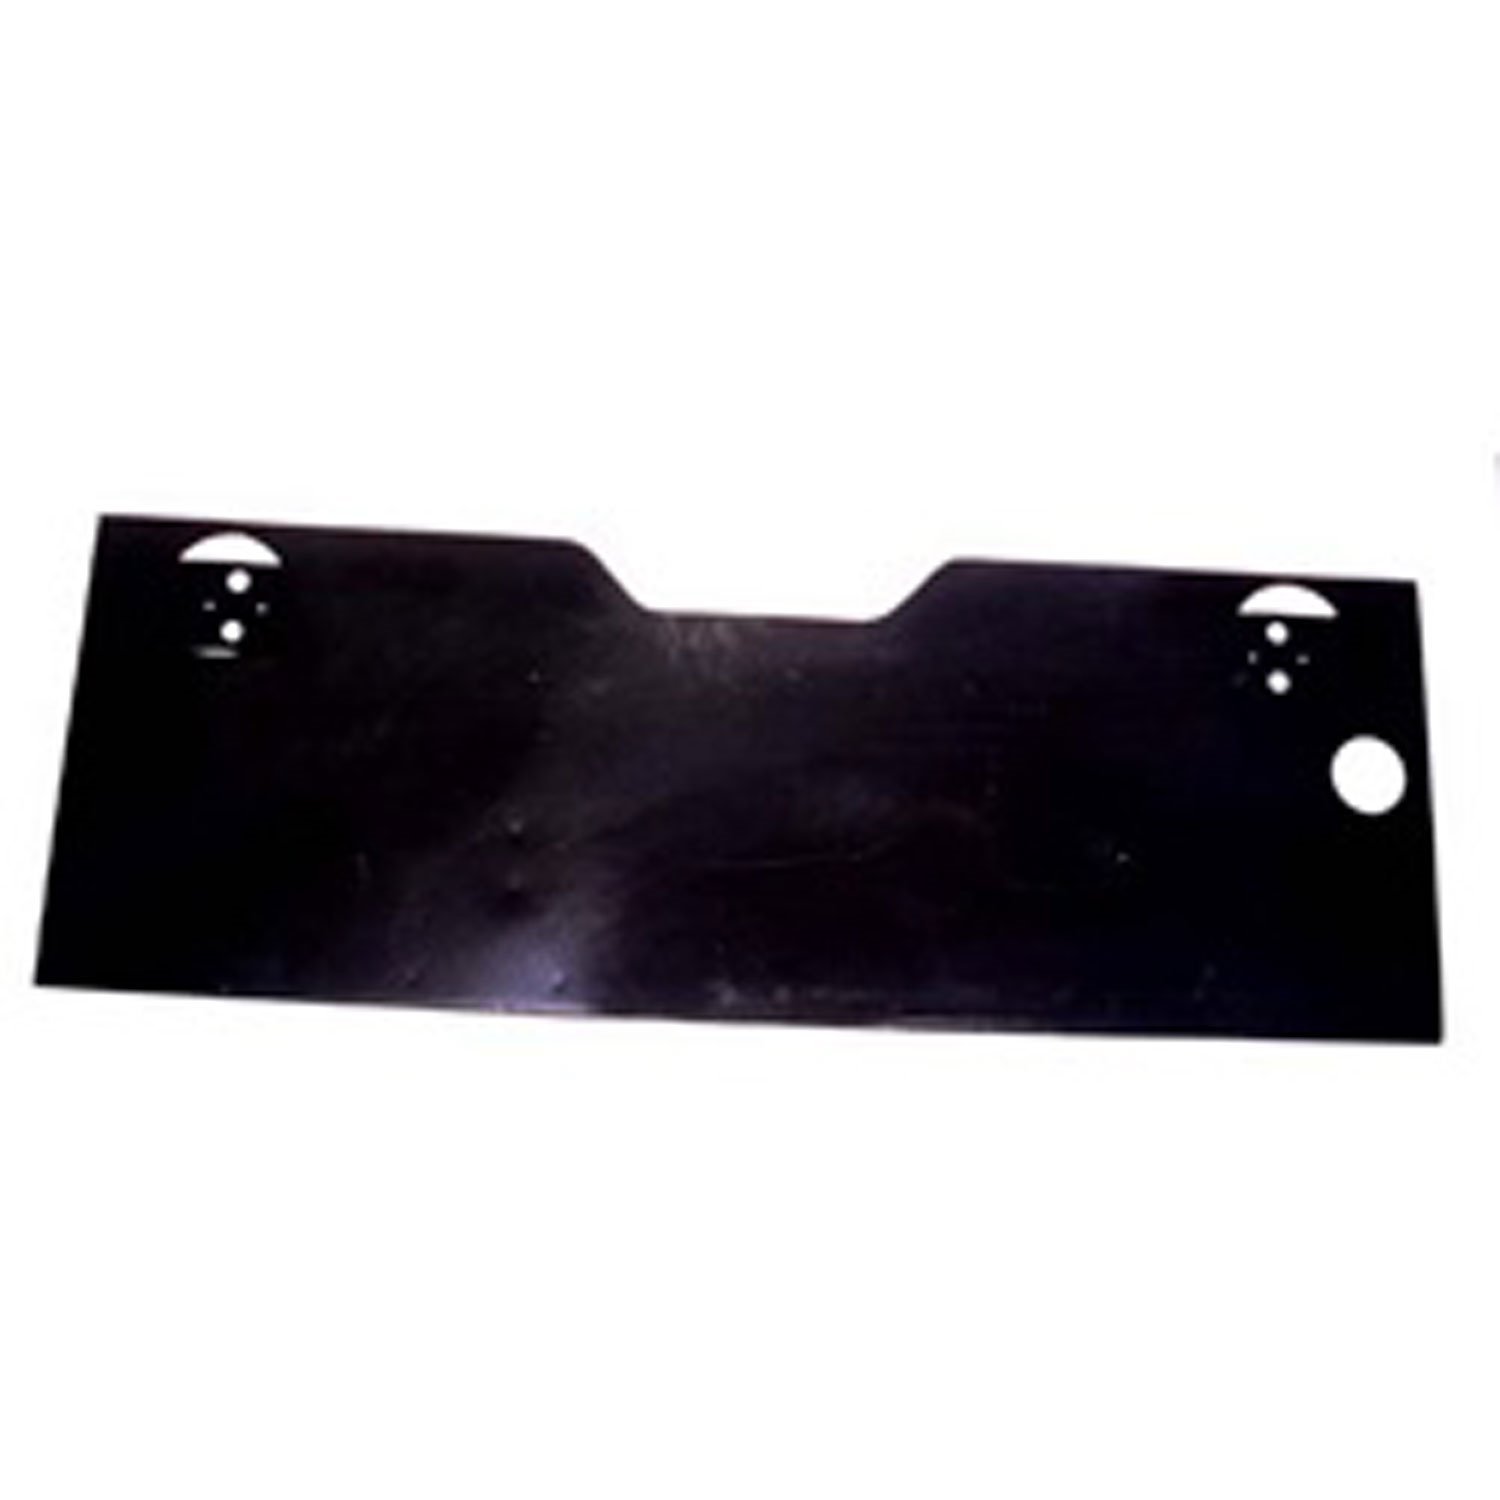 This reproduction rear tail panel from Omix-ADA fits